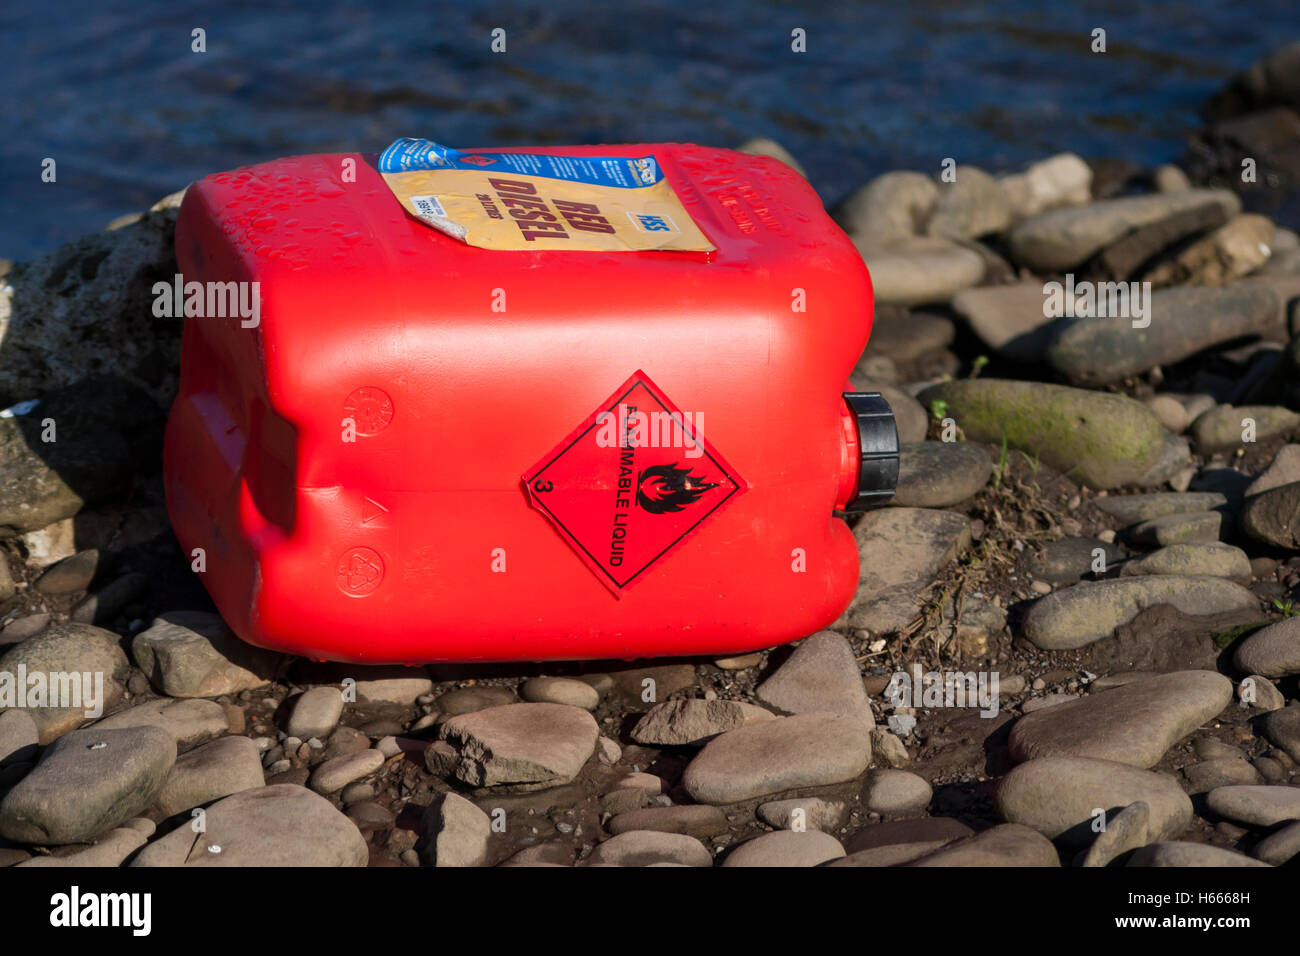 fuel drum polluting river bank Stock Photo